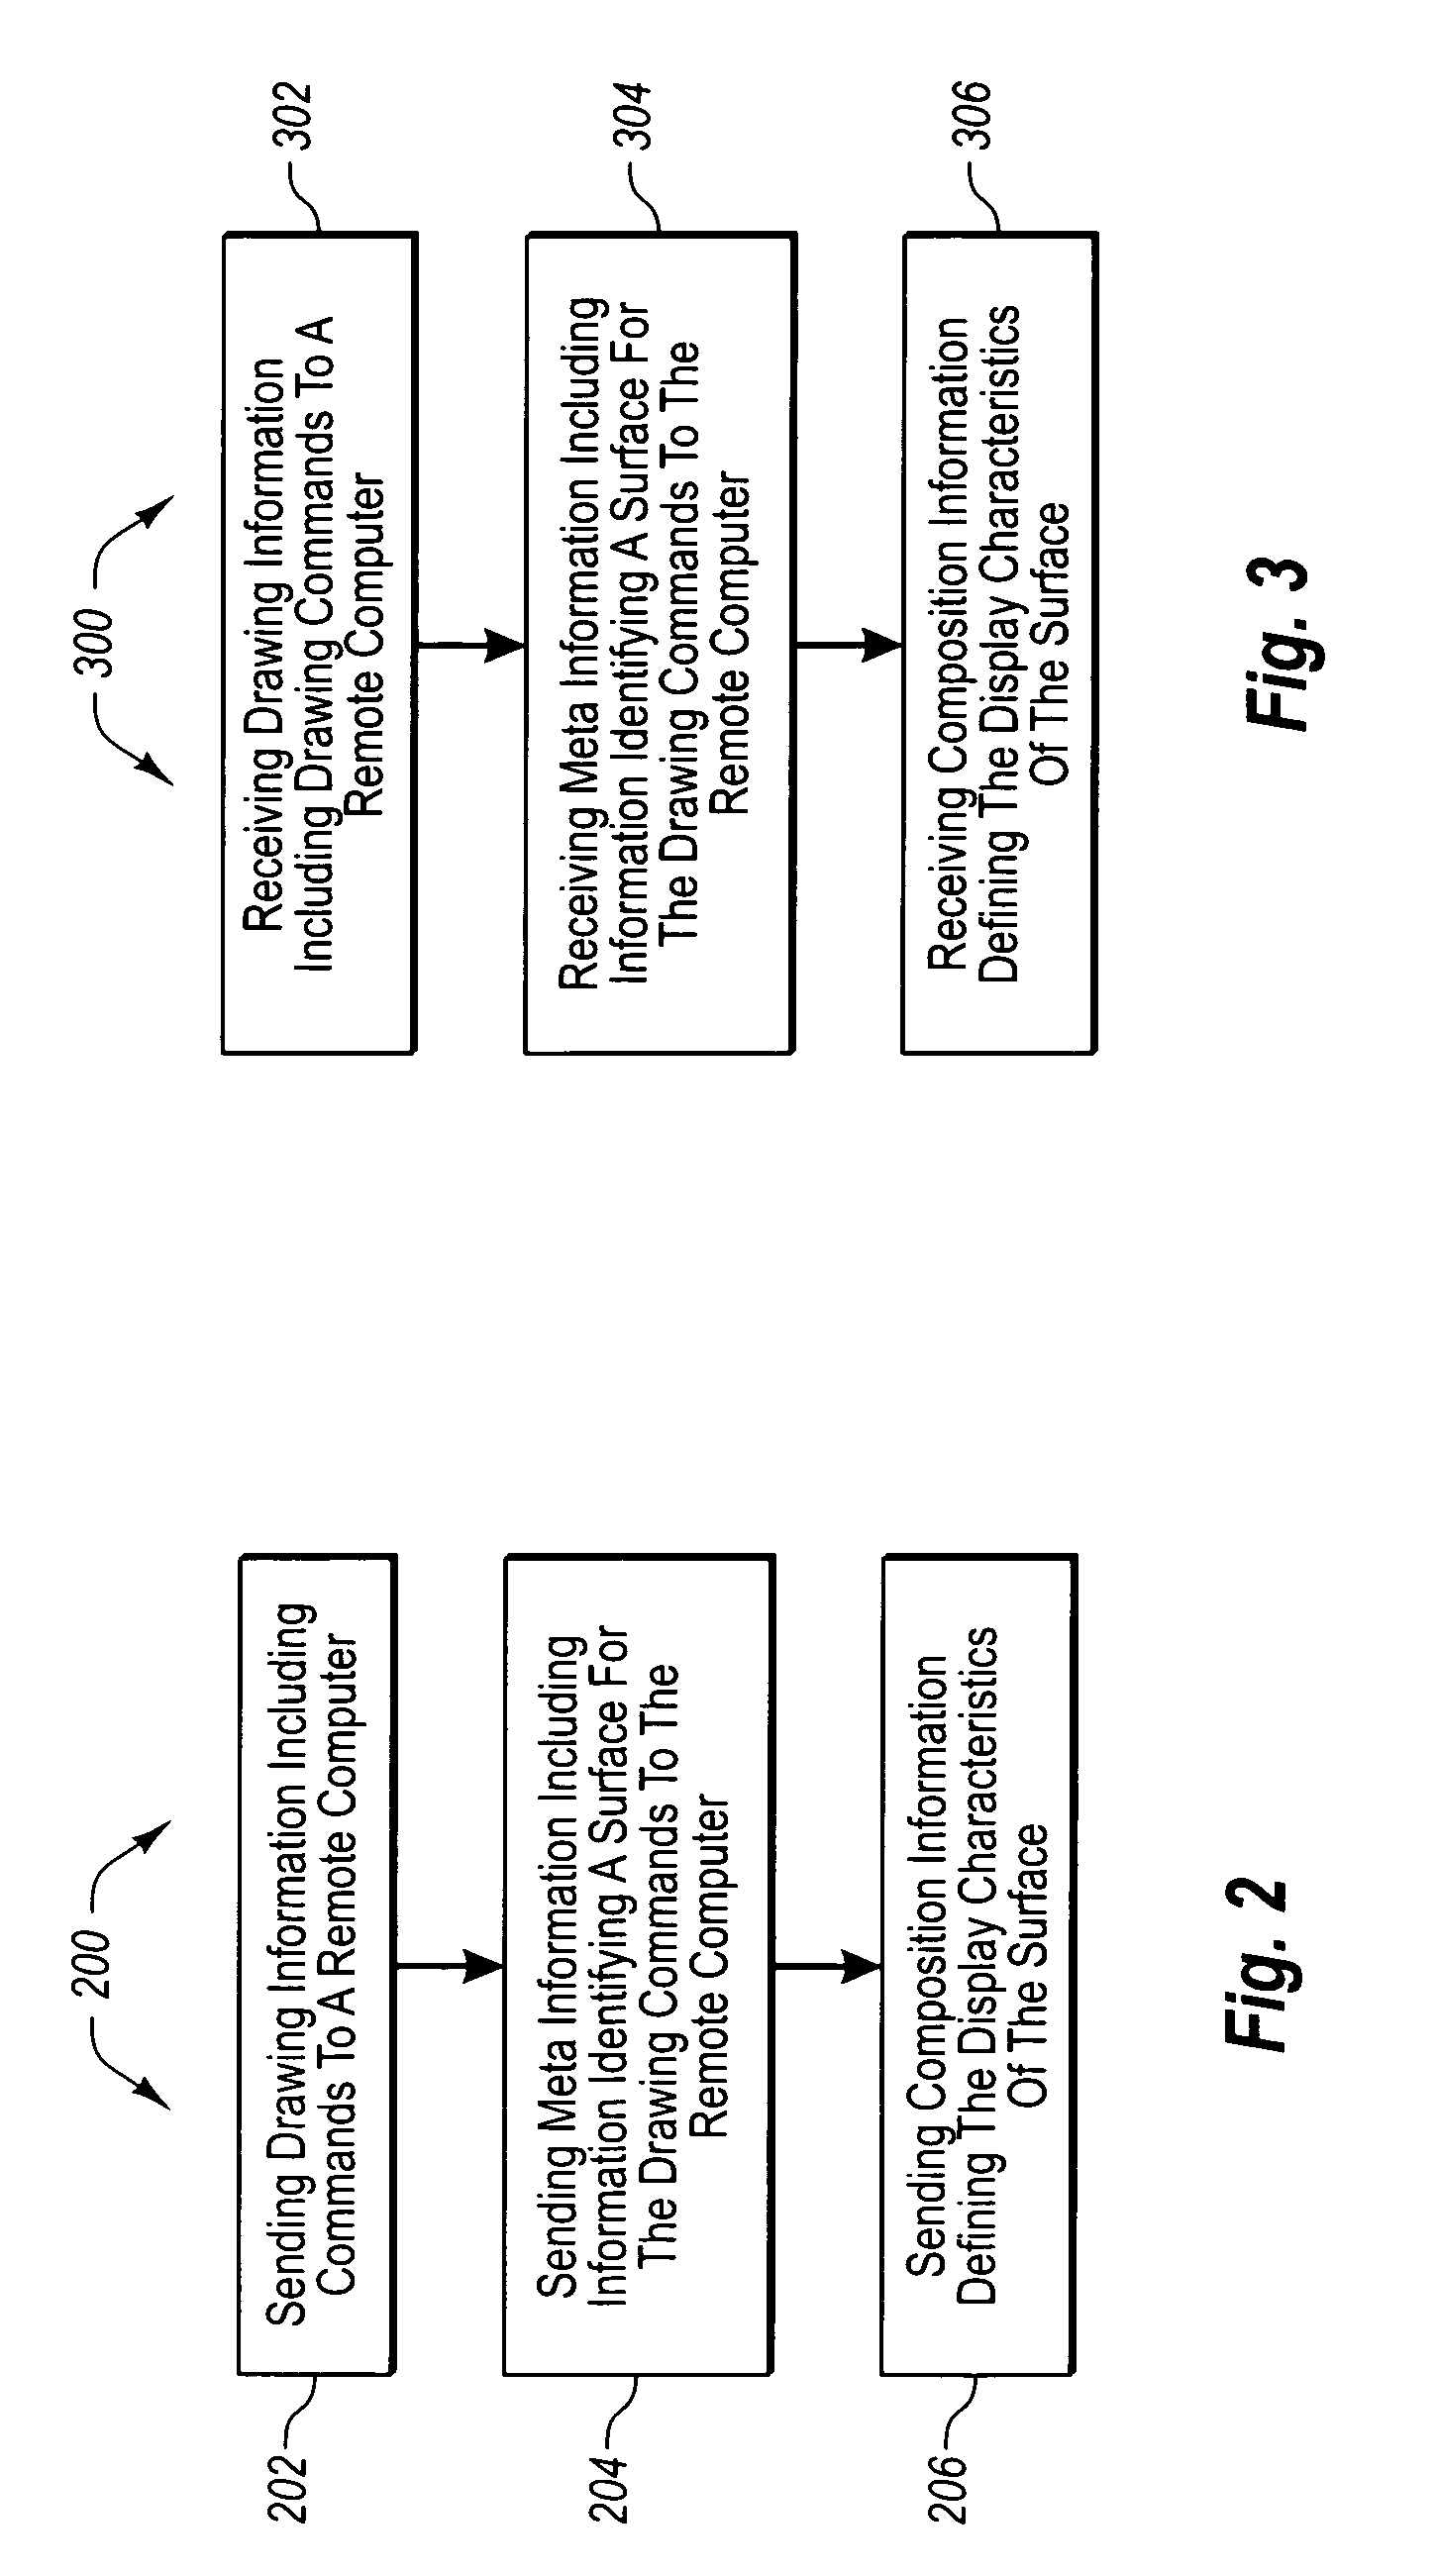 Remoting redirection layer for graphics device interface